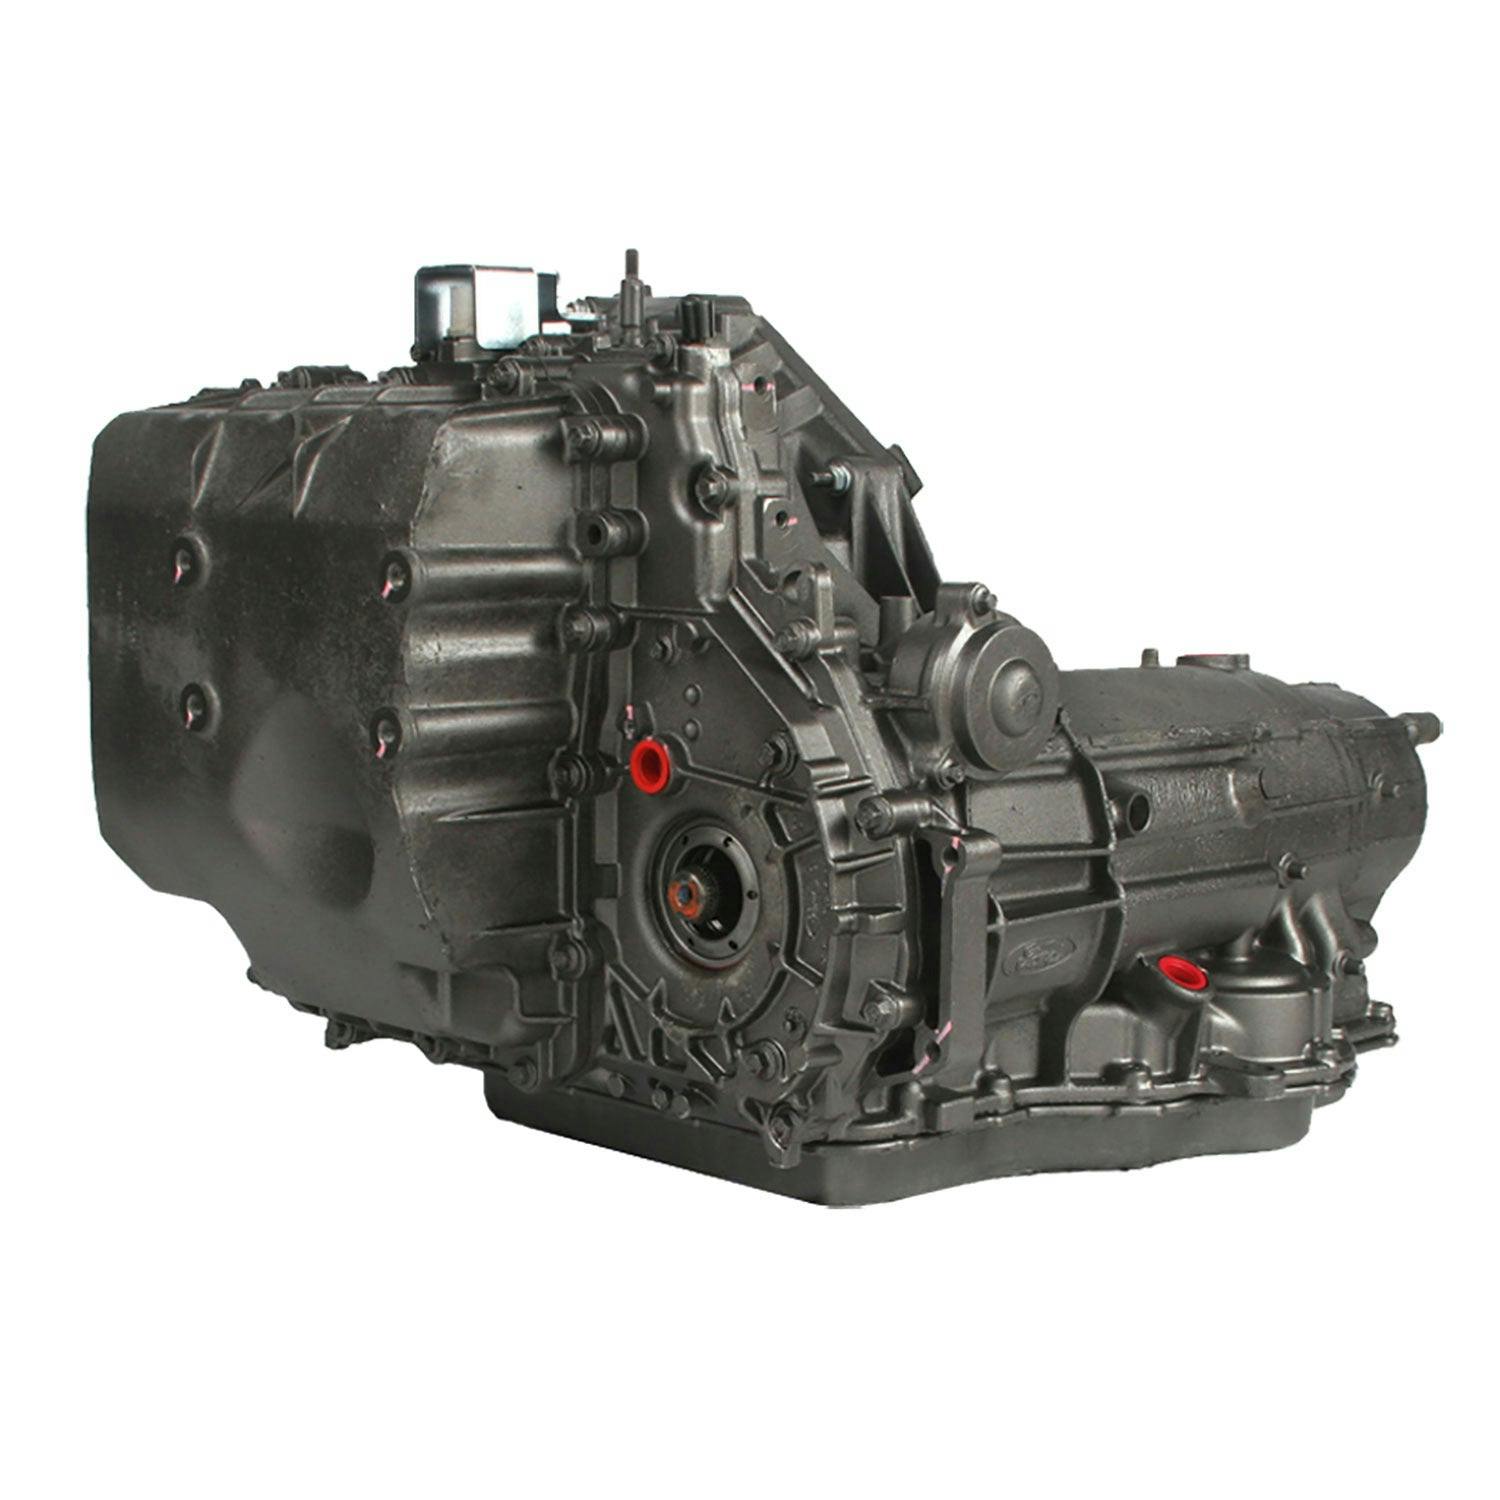 Automatic Transmission for 2000 Ford Taurus/Mercury Sable FWD with 3L V6 Engine